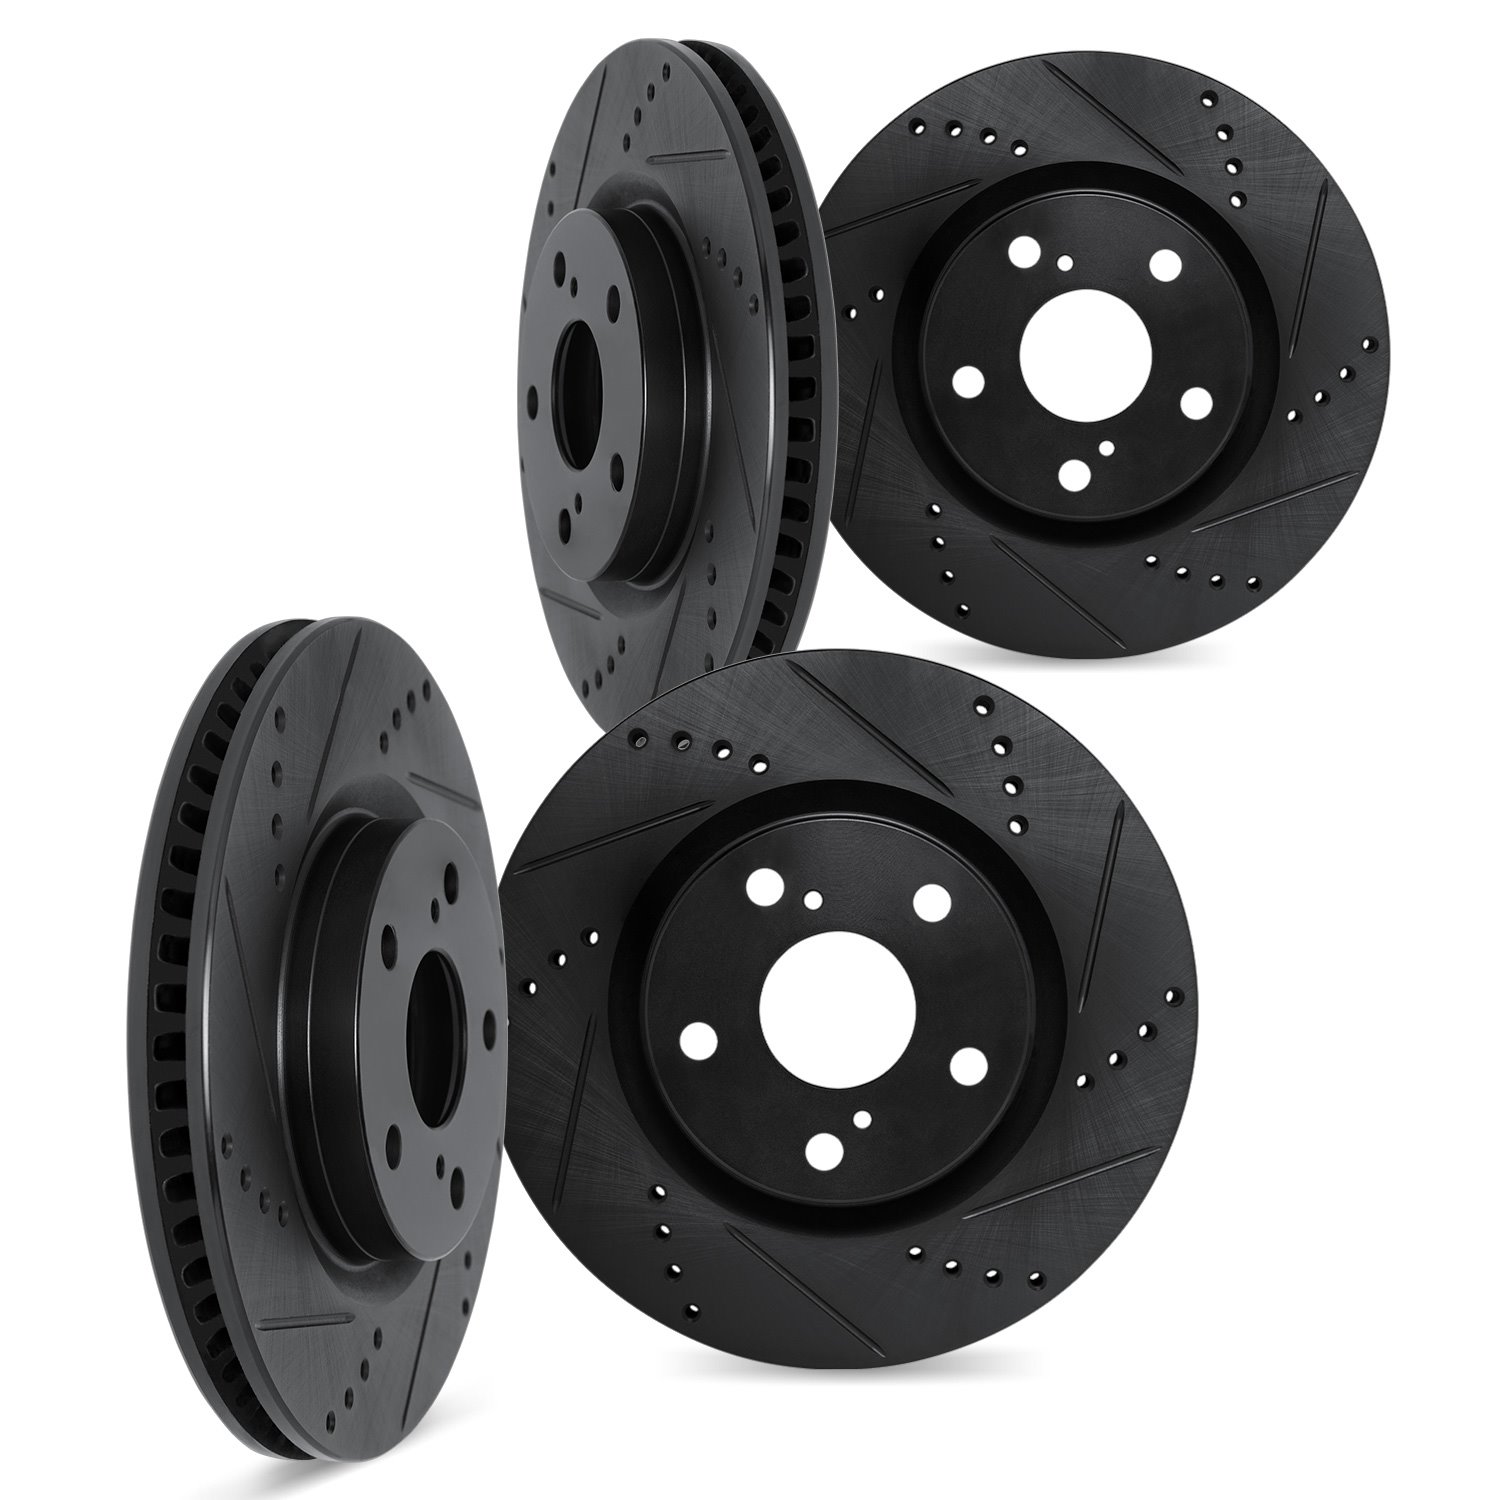 8004-73061 Drilled/Slotted Brake Rotors [Black], 2004-2009 Audi/Volkswagen, Position: Front and Rear